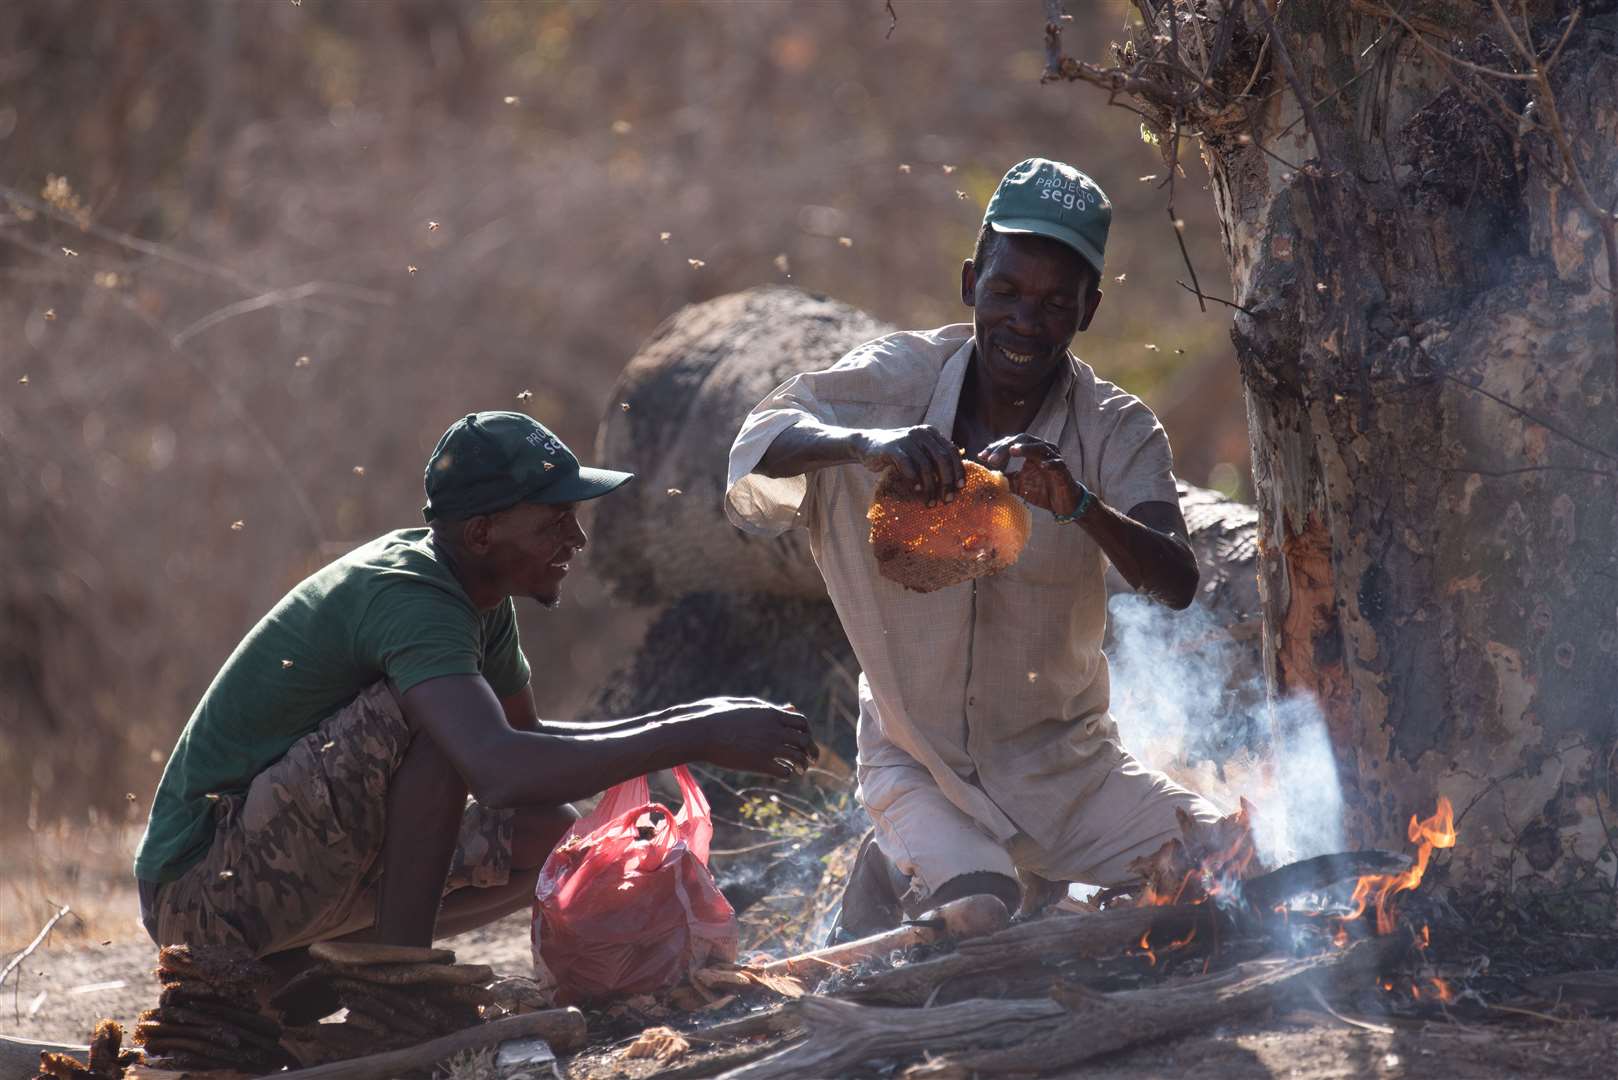 Yao honey hunters using fire and tools to harvest a bees’ nest in the Niassa Special Reserve in Mozambique (Claire Spottiswoode/University of Cambridge)